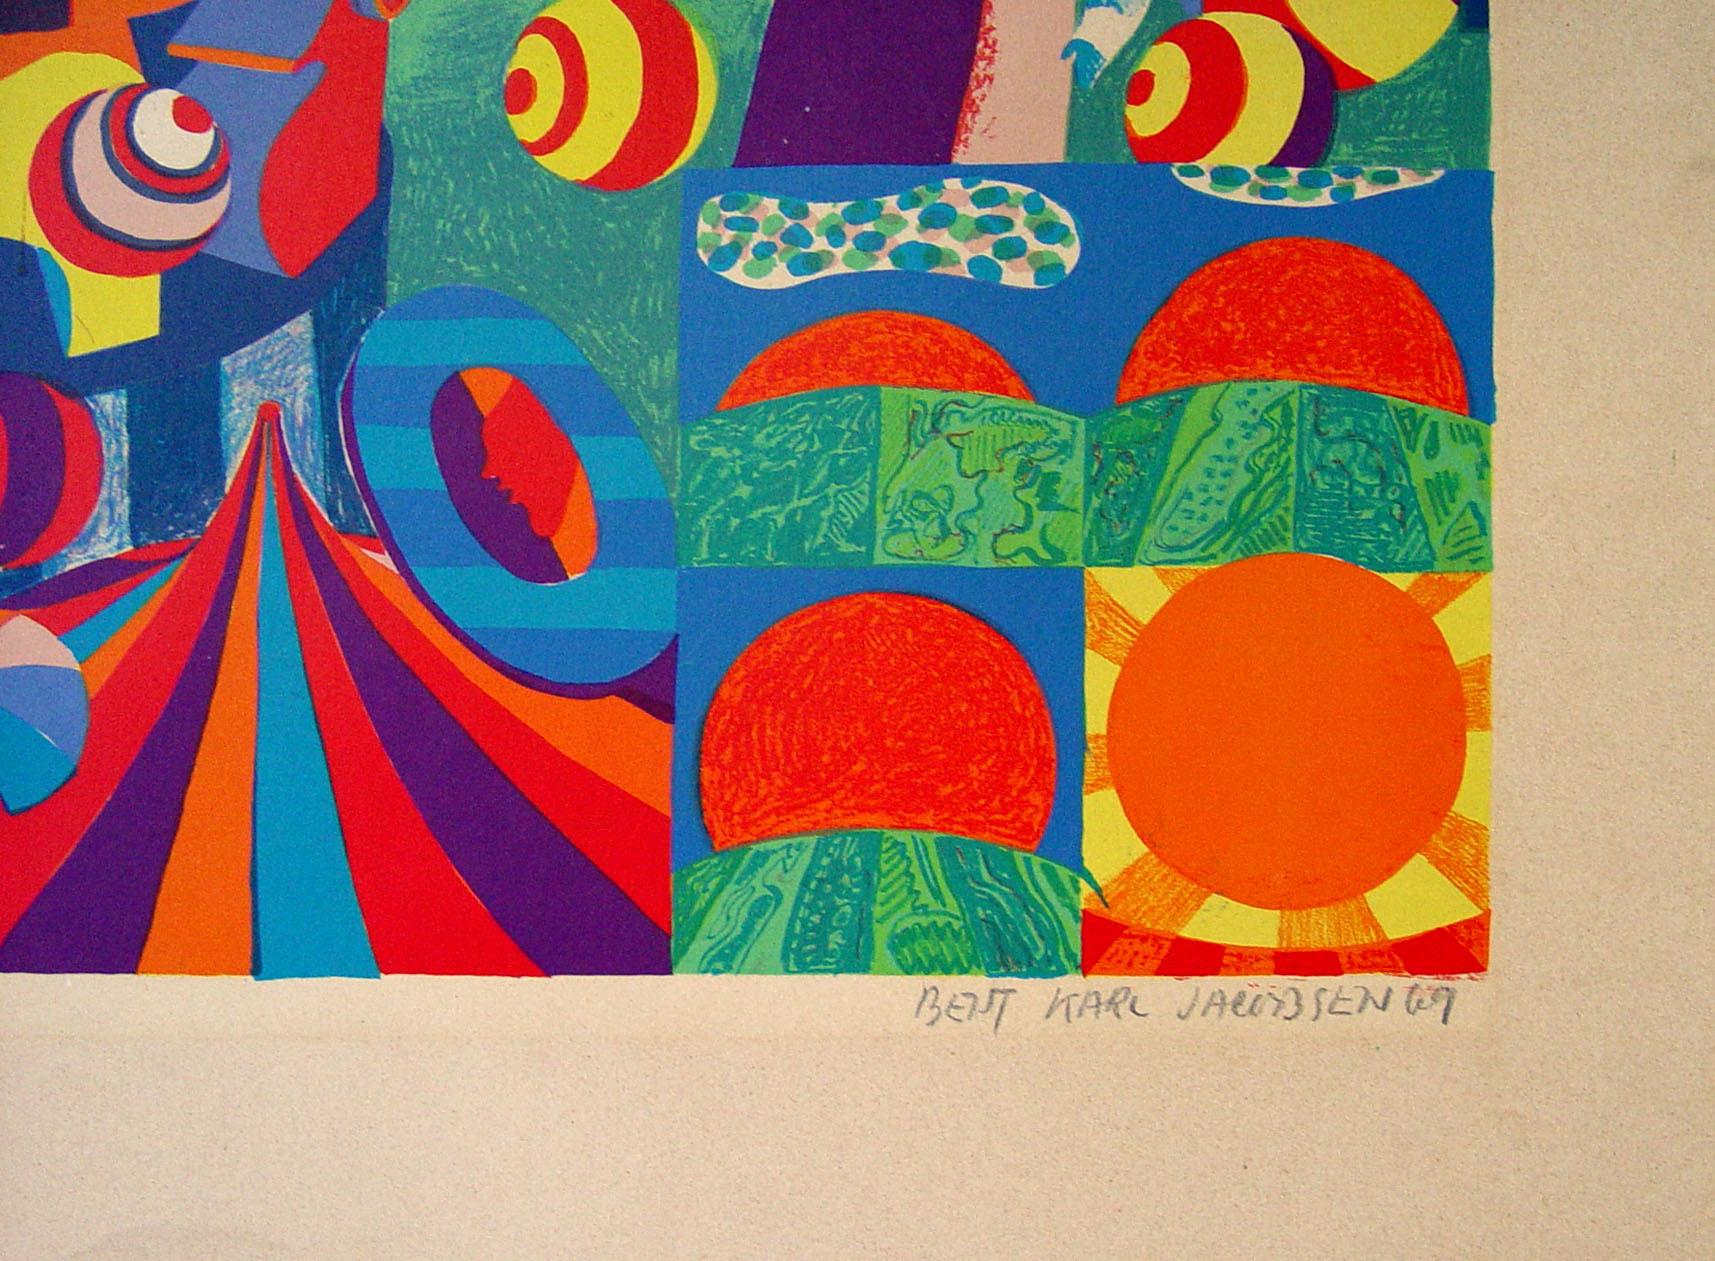 Vintage mid 20th century circus abstract print by Bent Karl Jacobsen (Denmark, 1934 - 2004). Signed and numbered lithograph in pencil 48/100. Unframed, mounted on original backing. Image, 18.5